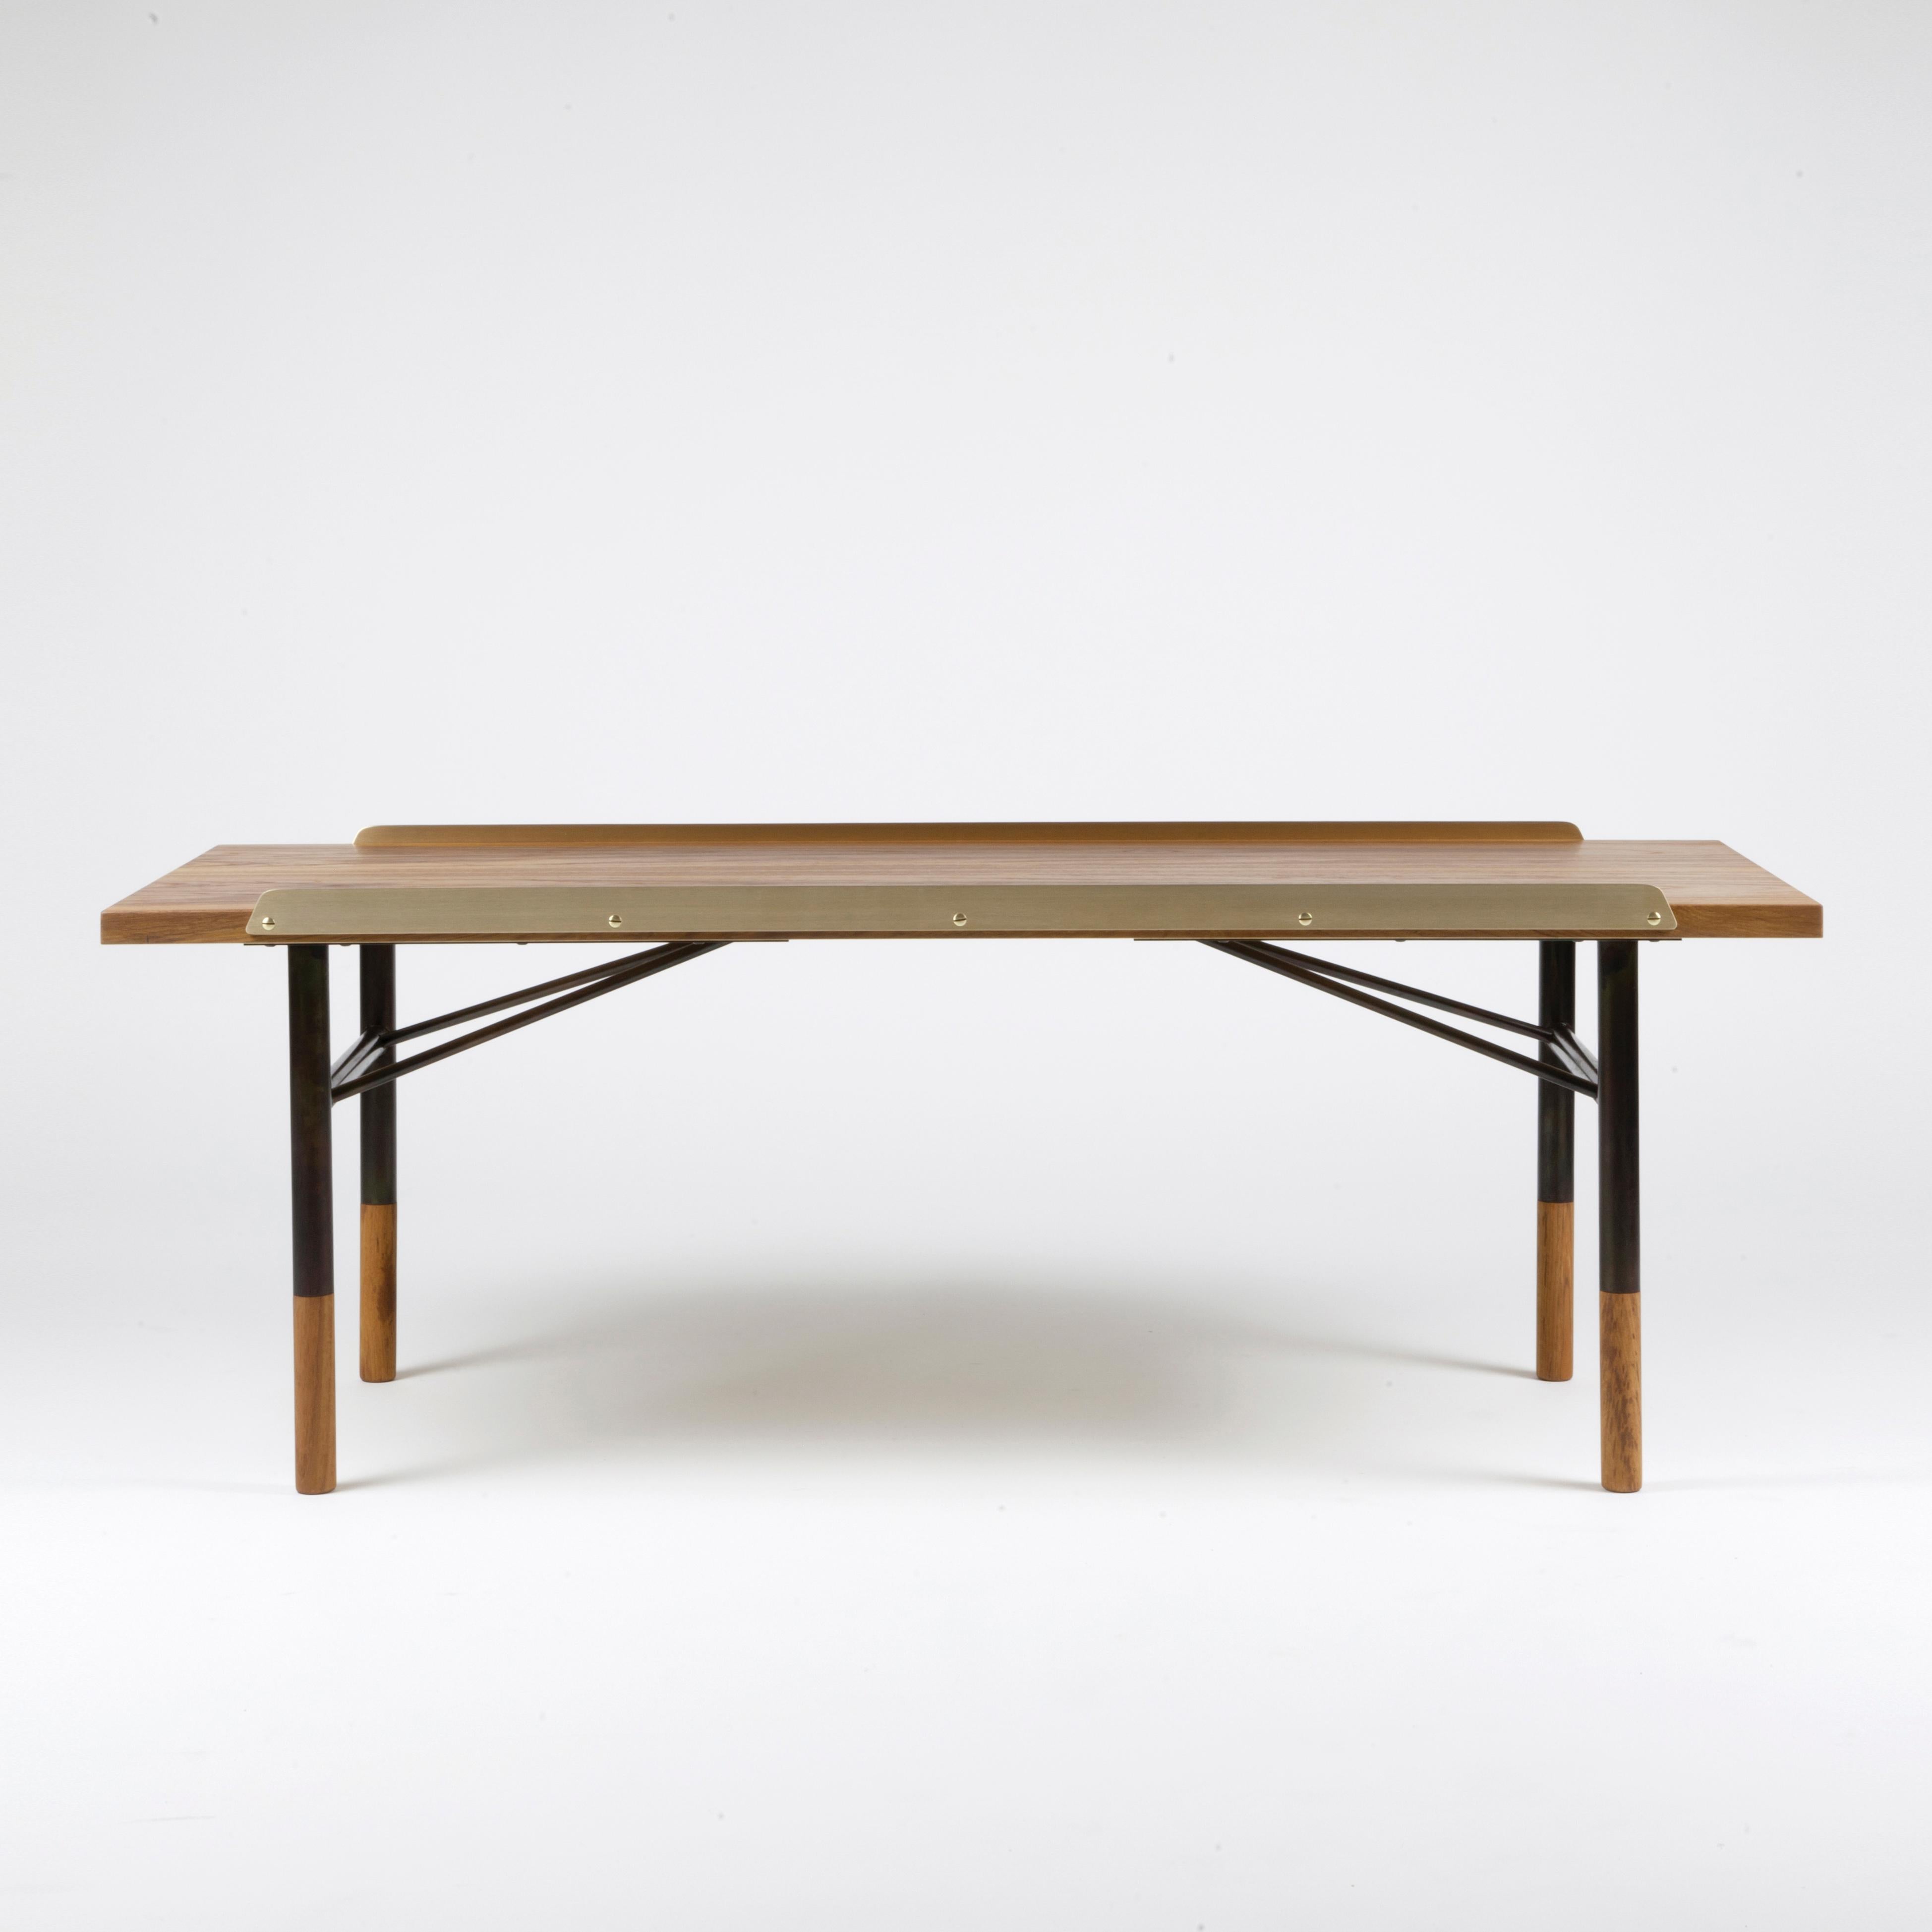 Table Bench designed by Finn Jhul
Manufactured by One collection Finn Juhl (Denmark)

Finn Juhl experienced an international breakthrough in the USA during the early 1950s. He subsequently designed a range of furniture with steel pipe frames,